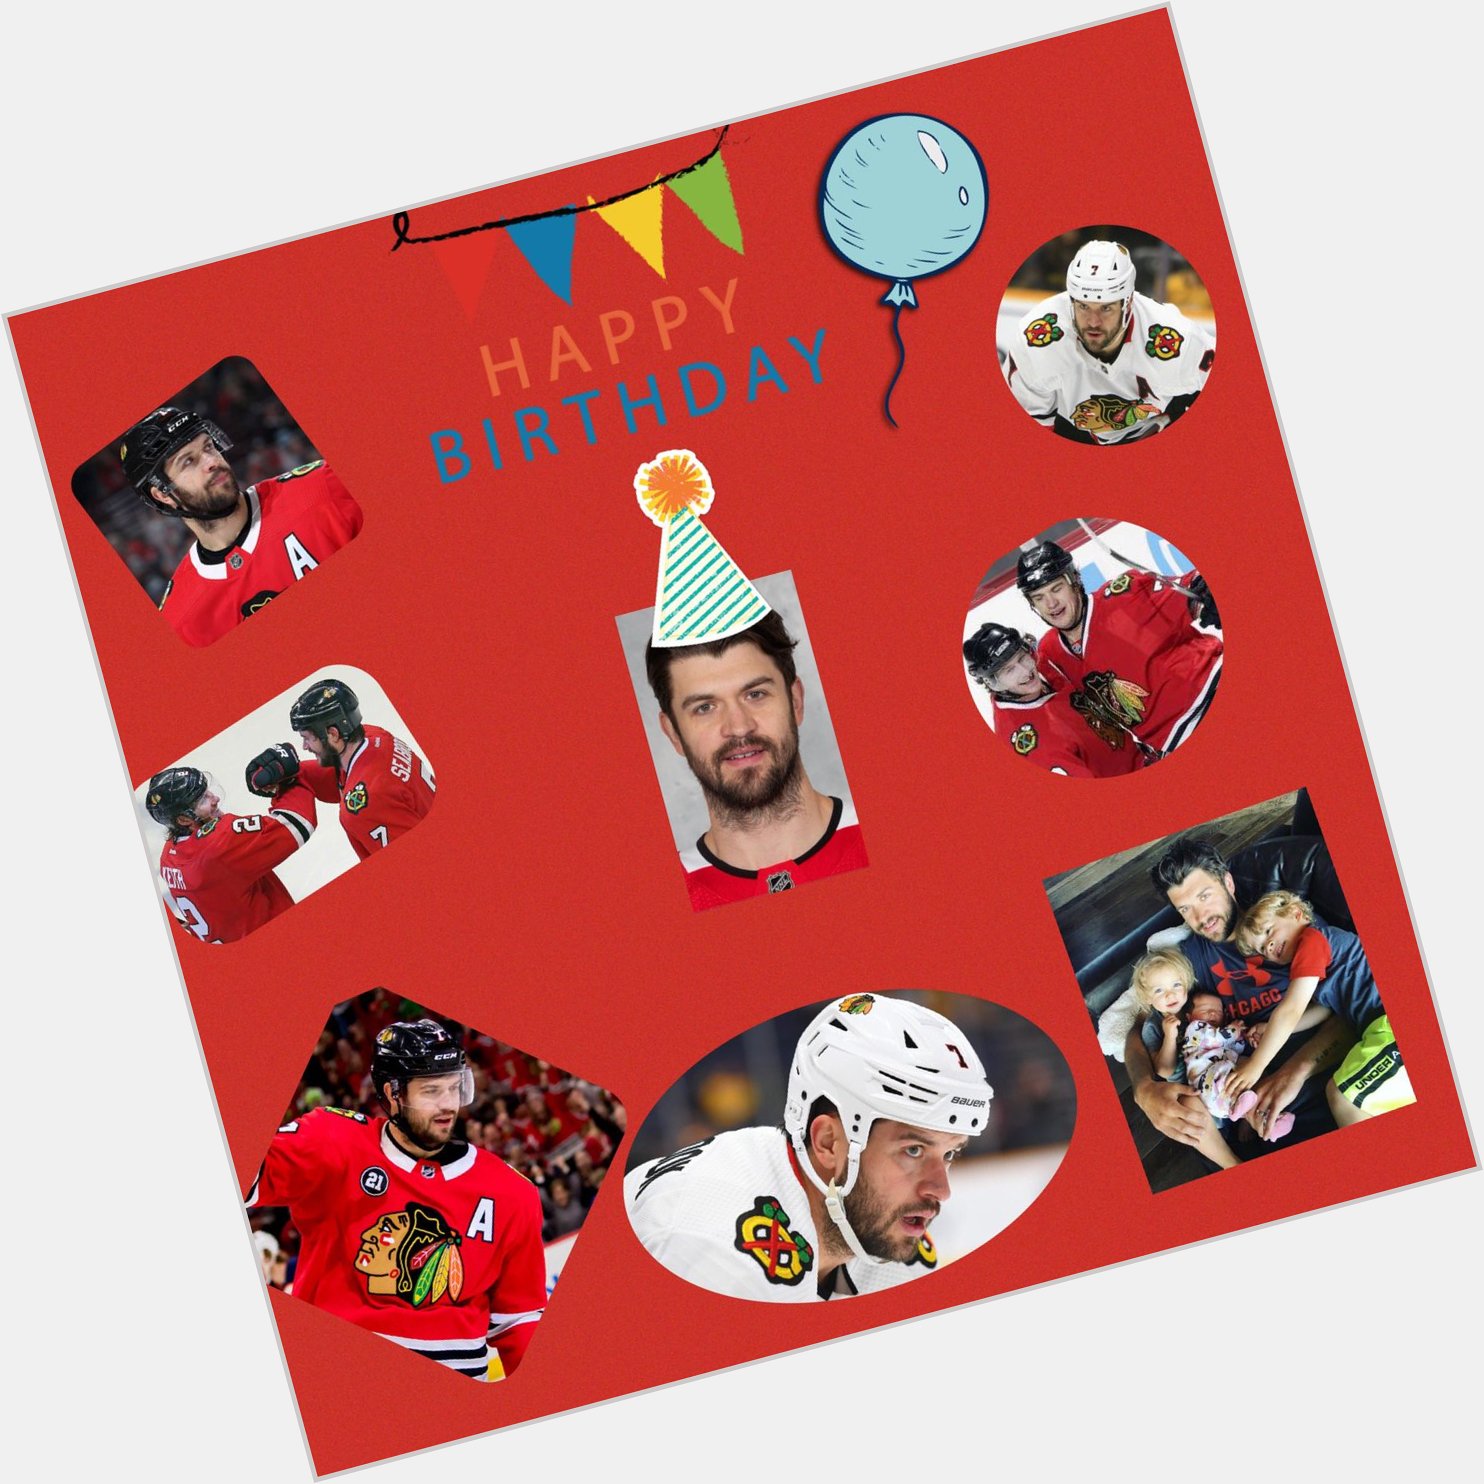 Wishing a happy birthday to Brent Seabrook today!  